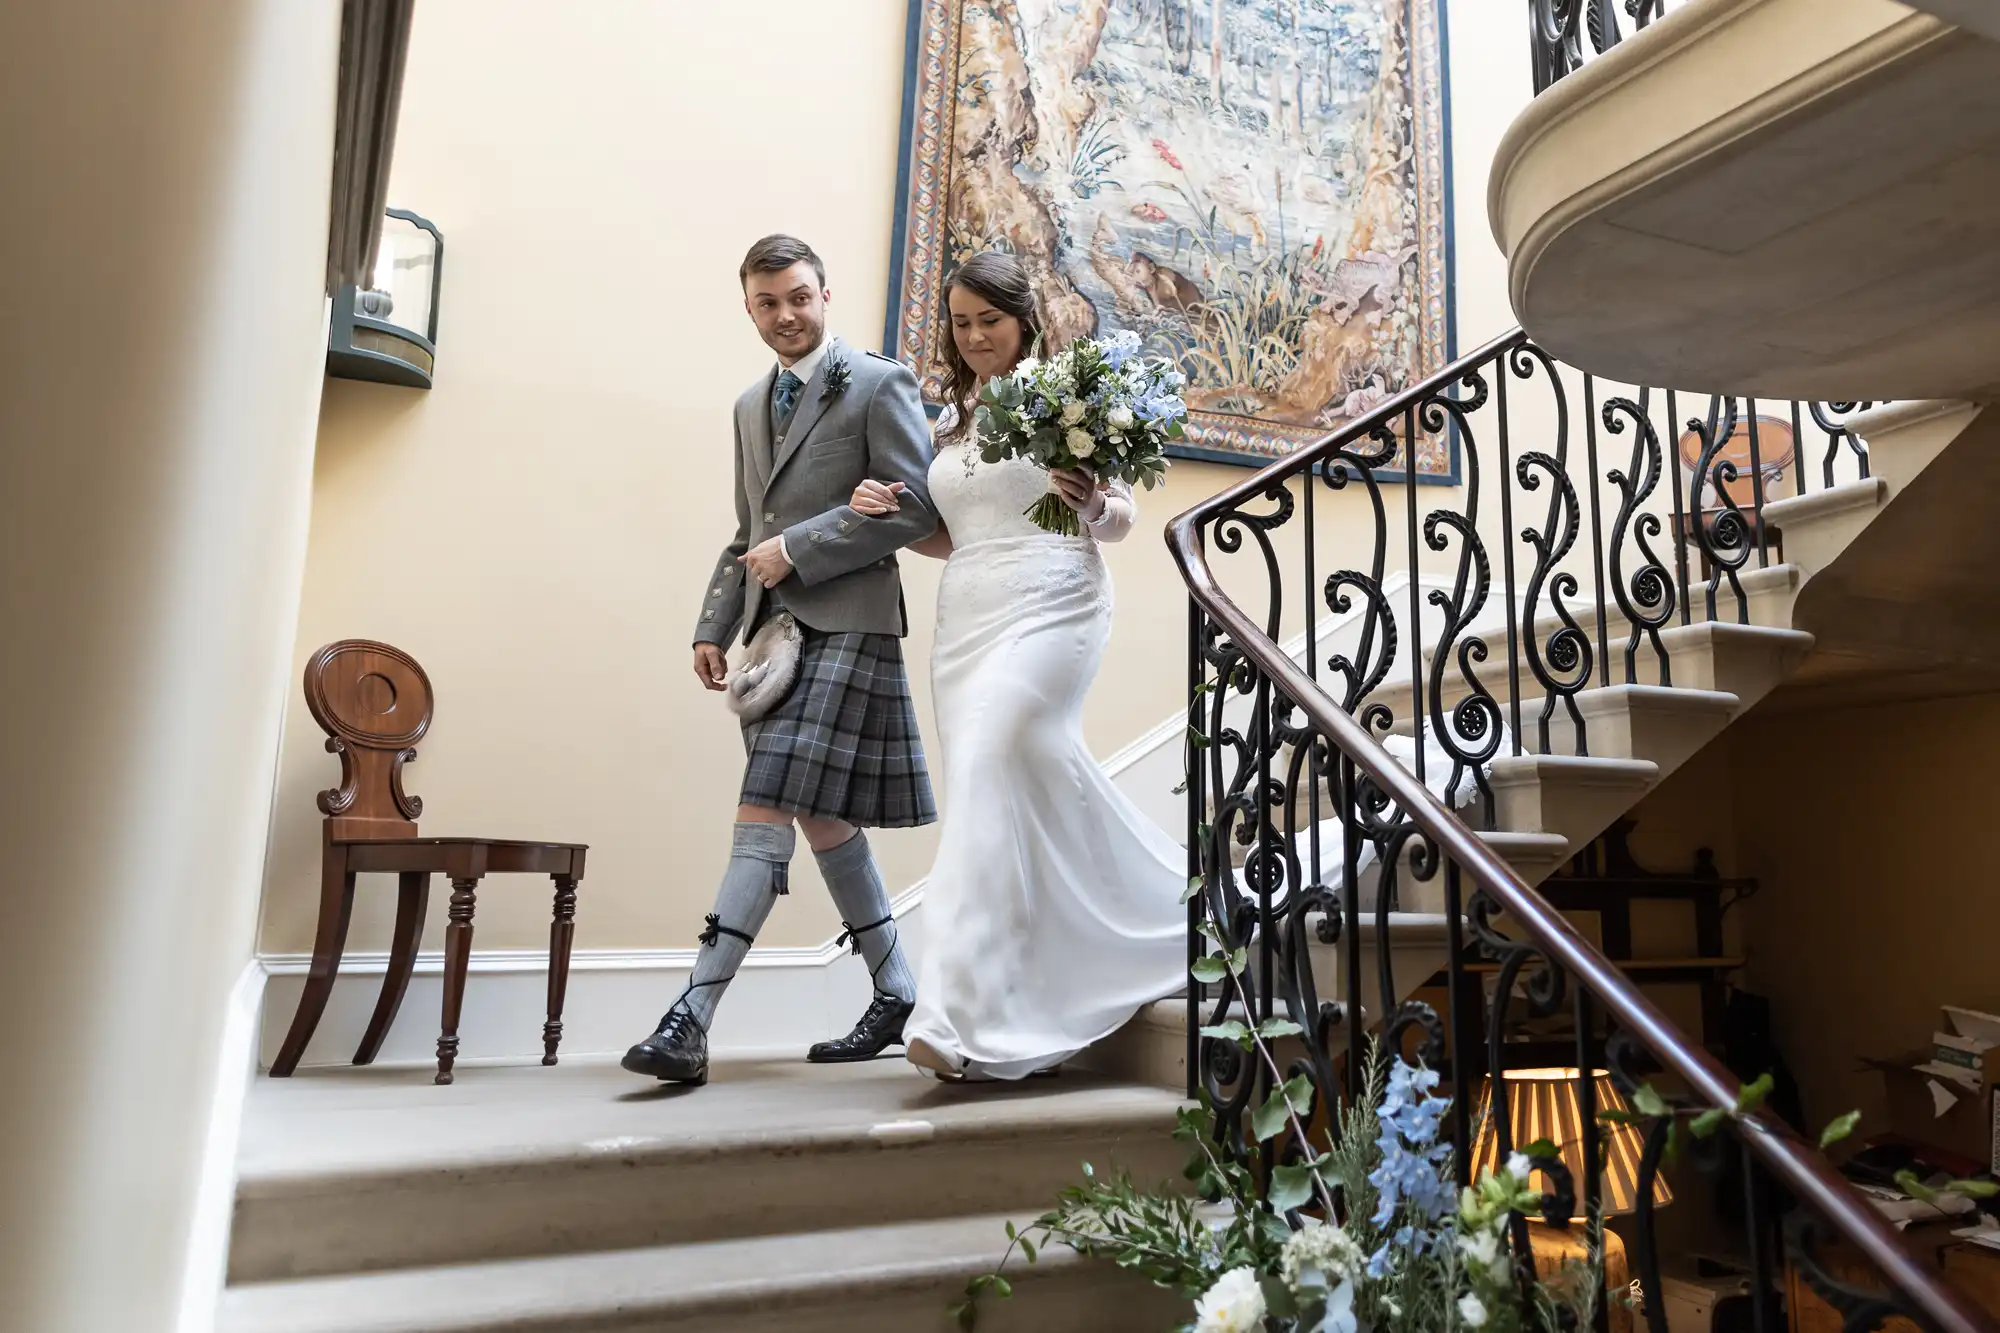 A bride and groom descending a staircase, the groom in a kilt and the bride in a long white dress, both smiling, with a floral bouquet in hand.